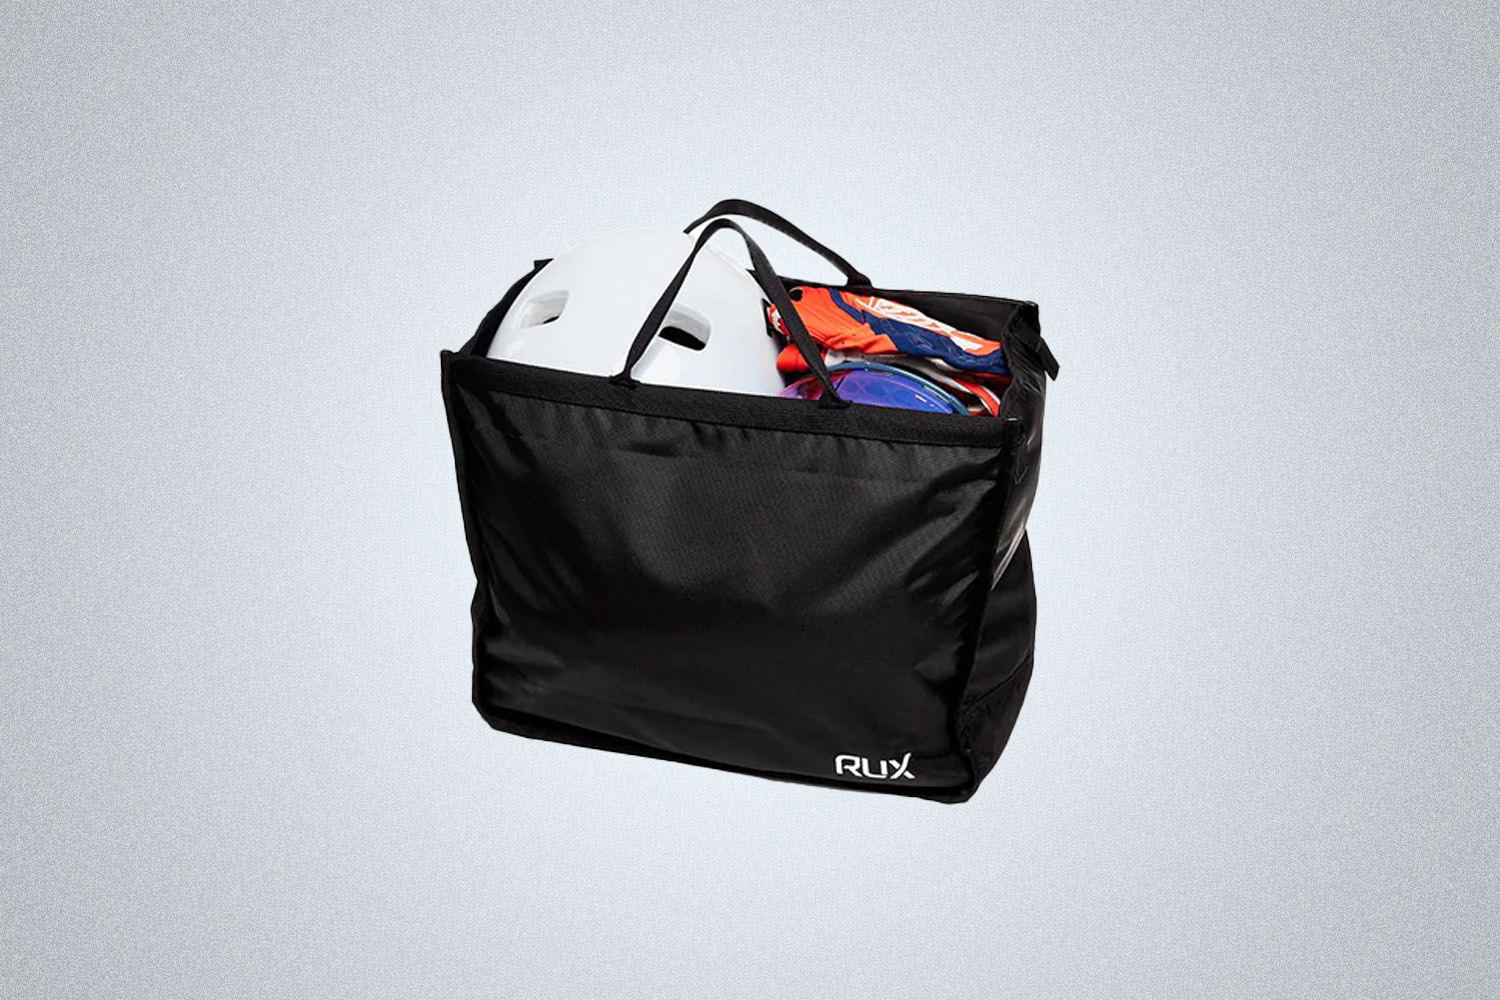 The Rux Nesting Divider Tote is one of the best father's day gifts to buy for under $100 in 2022